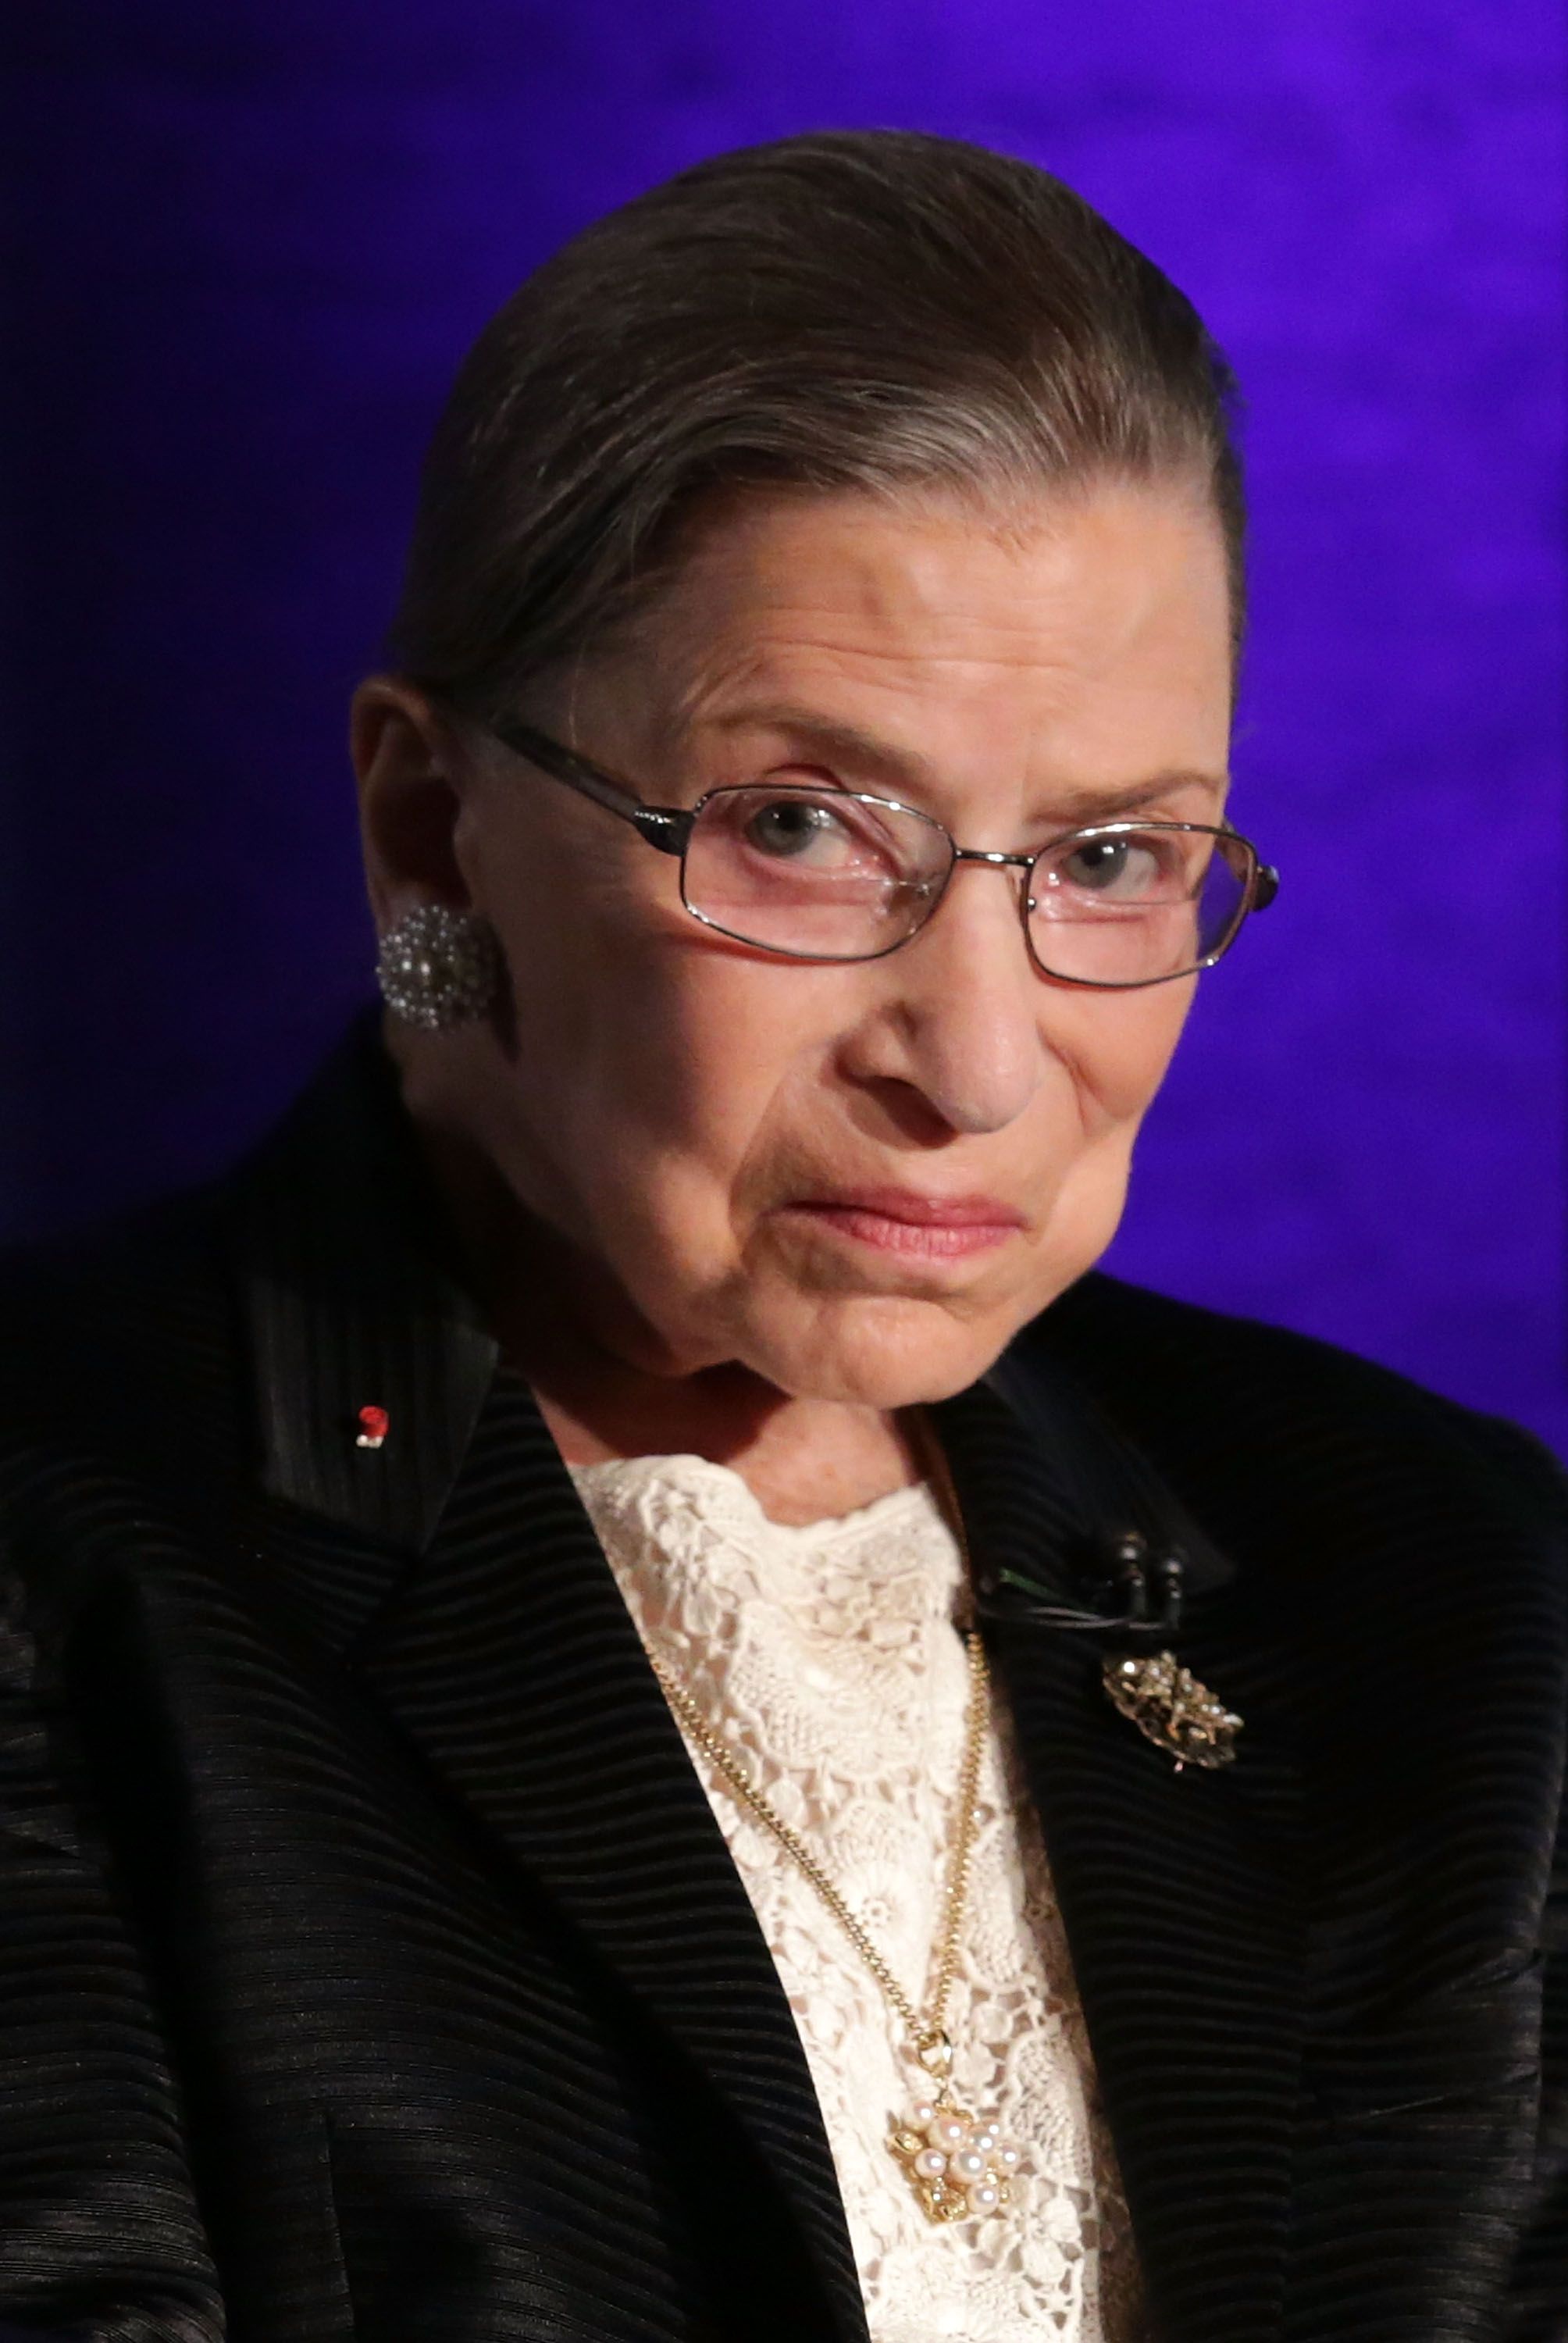 Supreme Court Justices Scalia and Ginsburg Discuss First Amendment At Forum